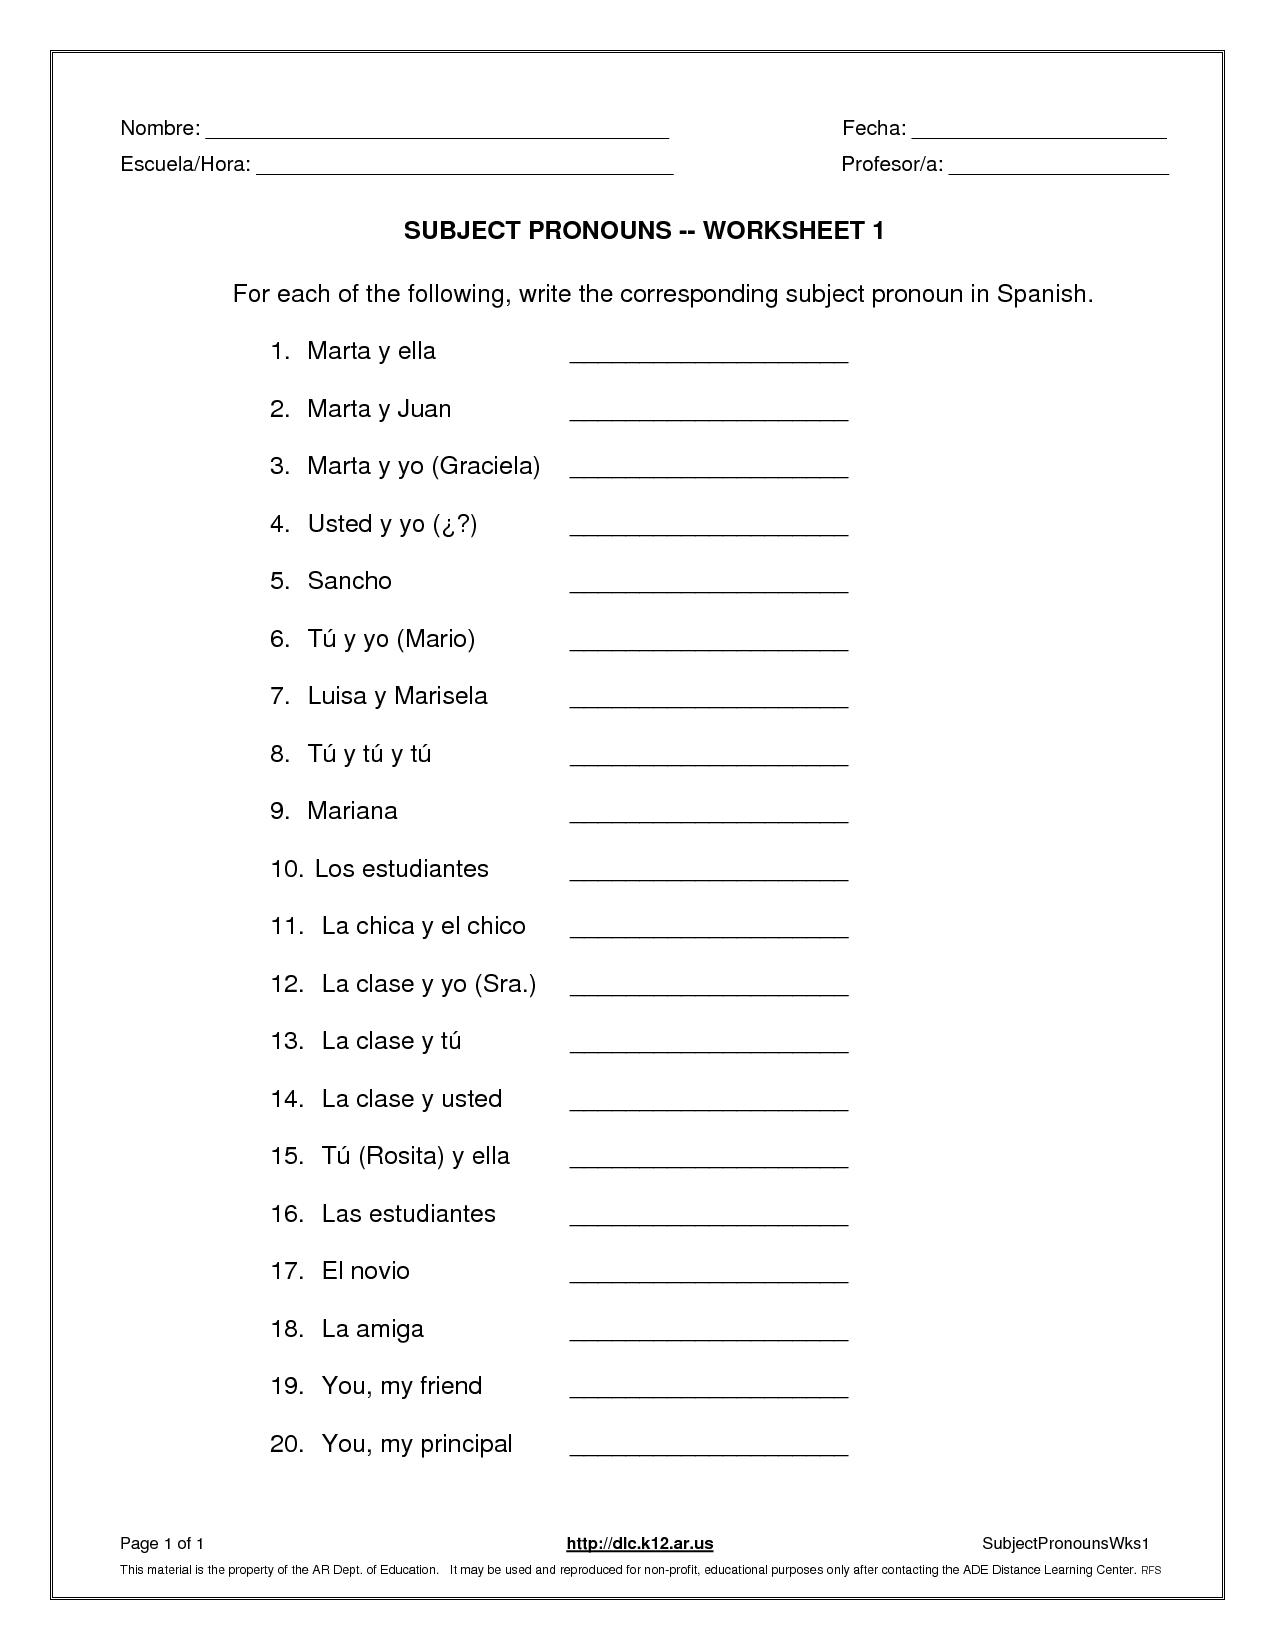 personal-pronouns-online-and-pdf-worksheet-by-superenglishland-free